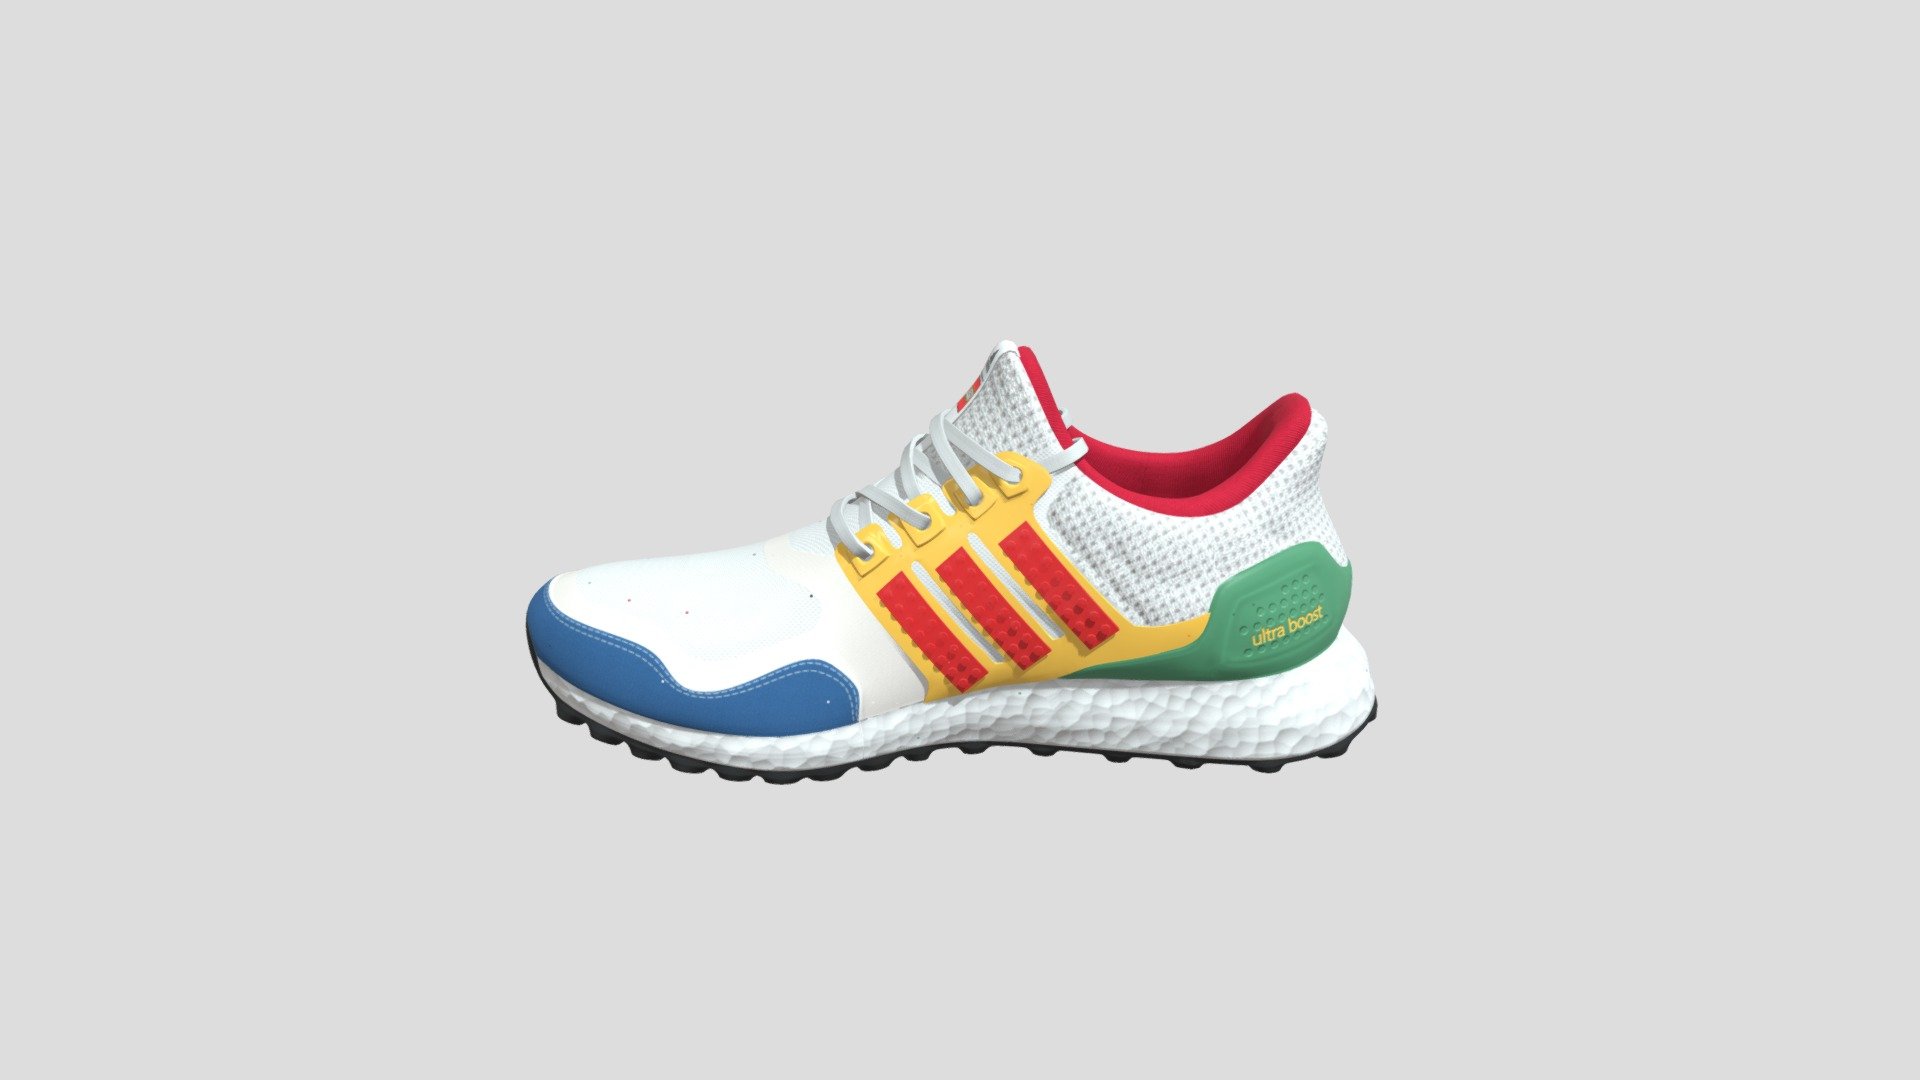 ADIDAS ULTRABOOST X LEGO 3D model Purposed For assembling the characters design, creating environment 3d, realistic scene rendering, and any project. Available in all 4 formats.

Maya 2020 Vray 5.0
Maya 2020 Arnold 4.2.3
FBX
Obj
textures with 4K quality.

BaseColor
Metallic
Normal
Roughness - ADIDAS ULTRABOOST X LEGO - 3D model by vissanu_gto 3d model